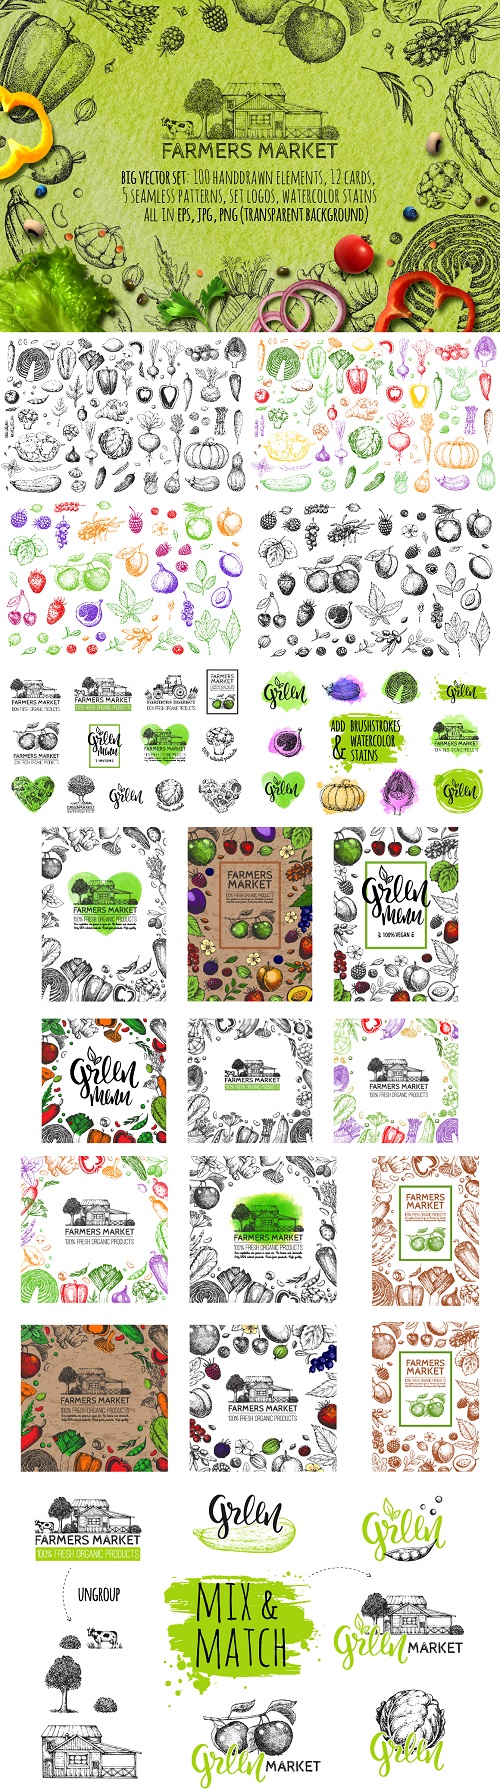 Hand Drawn Vegetables and Fruit 1934842